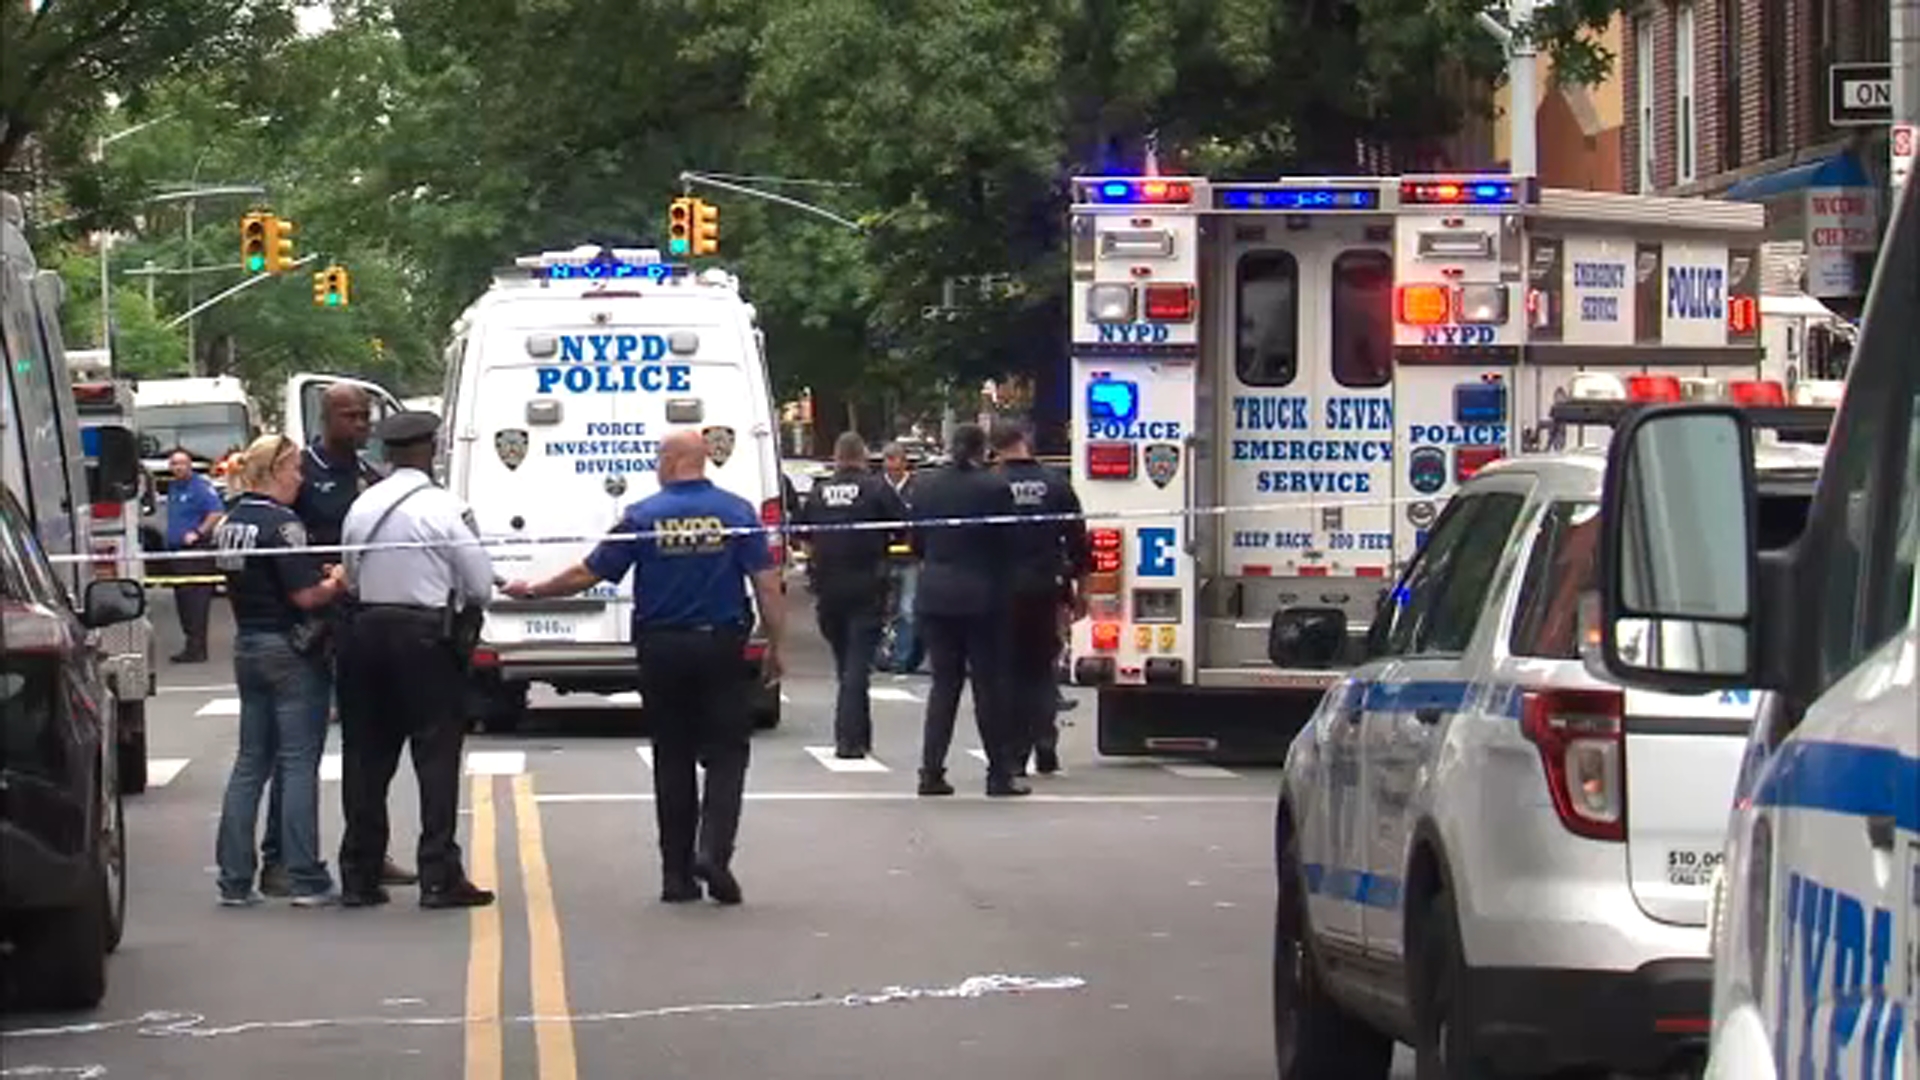 17-year-old teen injured in police-involved shooting in East Flatbush